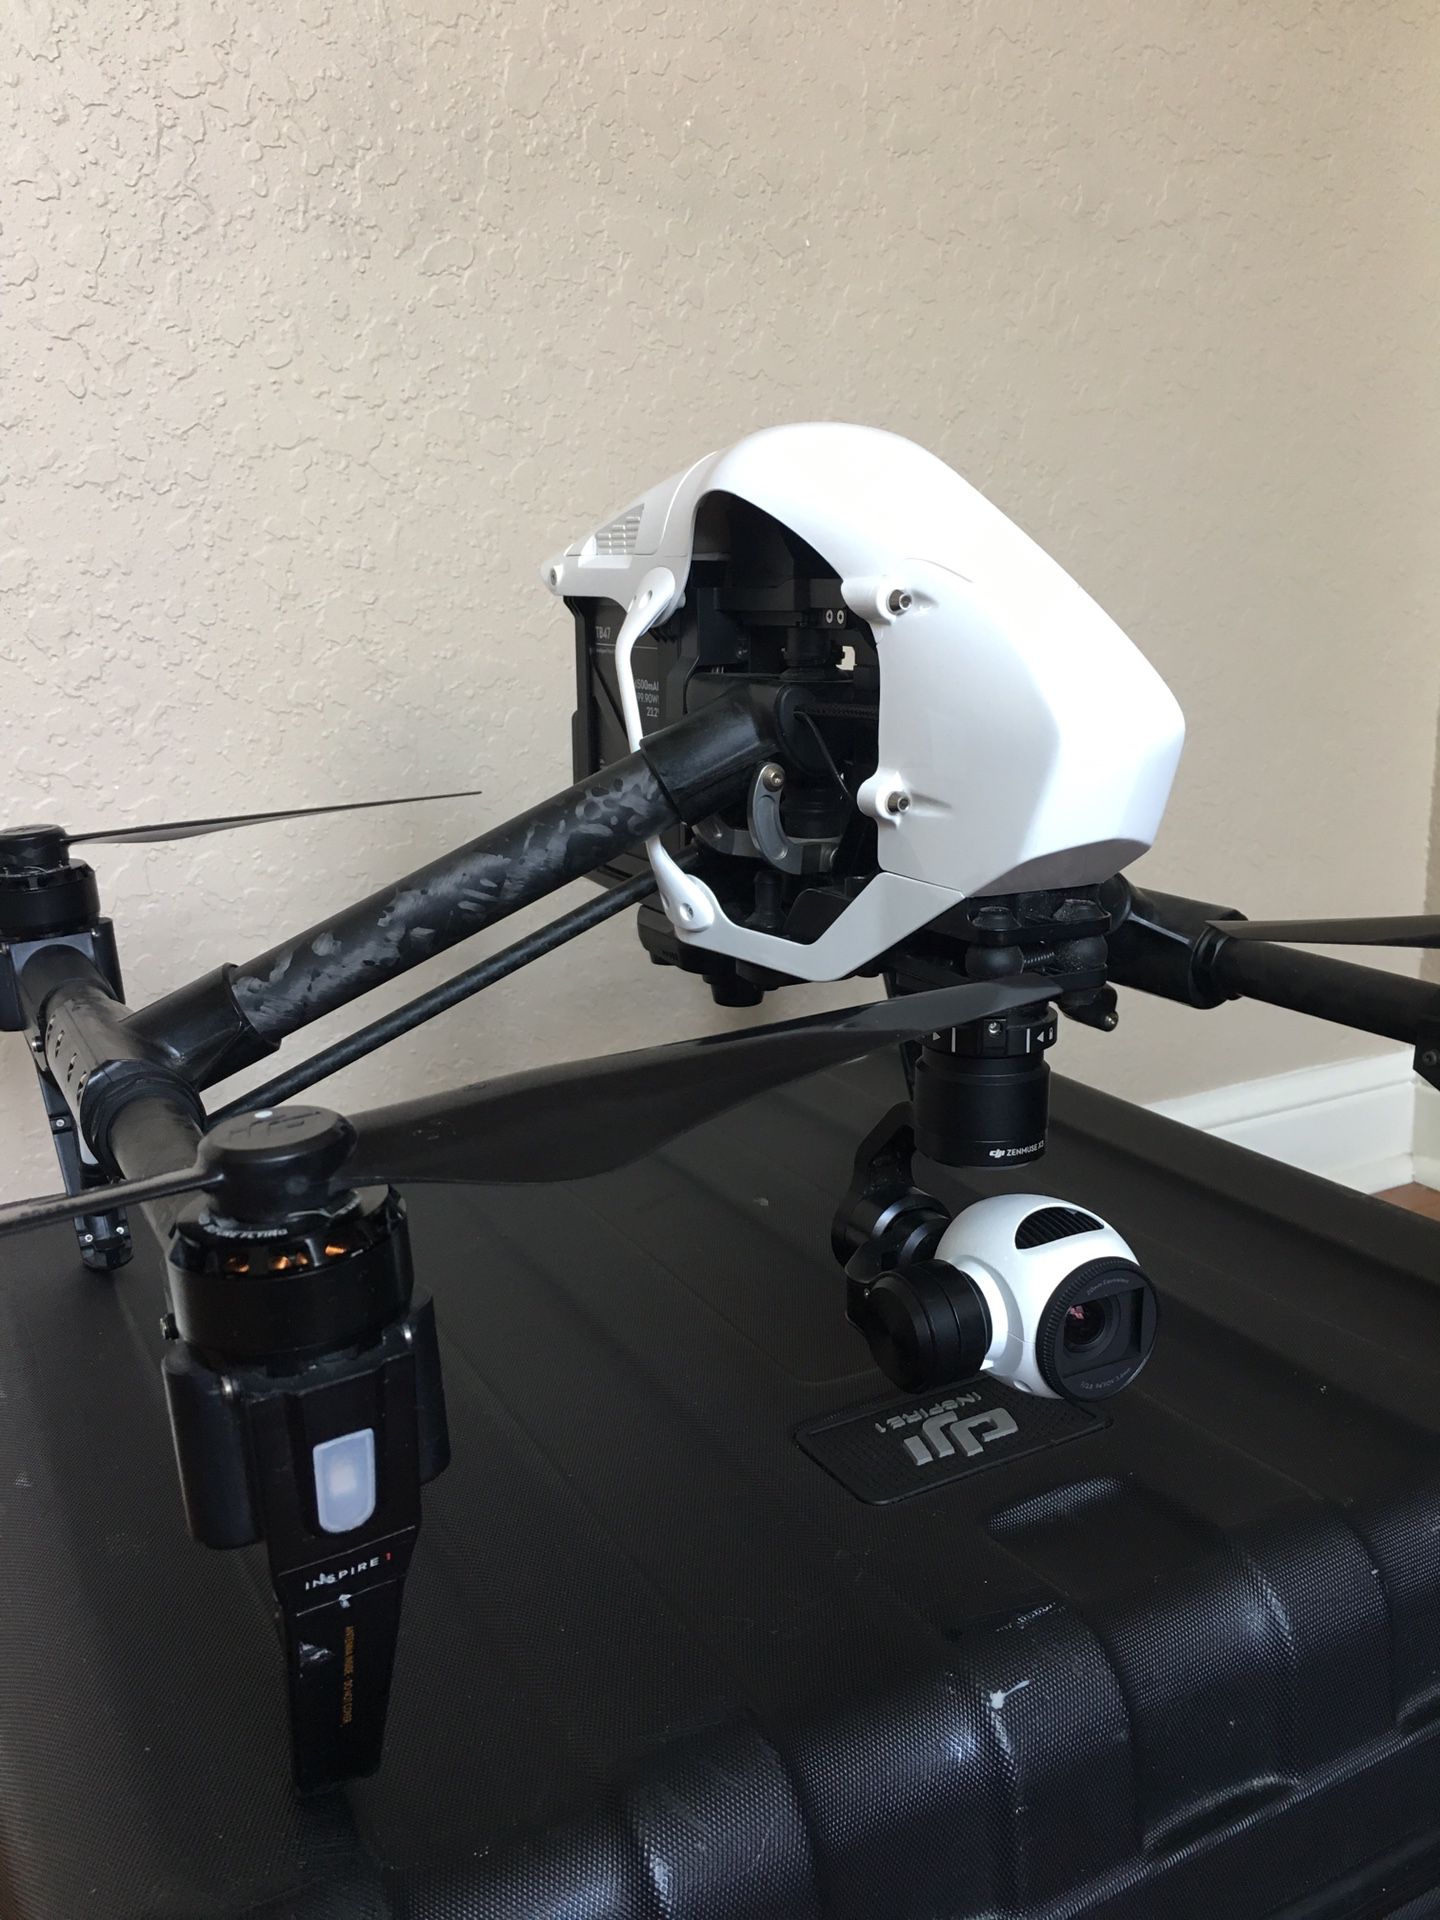 Dji Inspire 1 Drone With Accessories